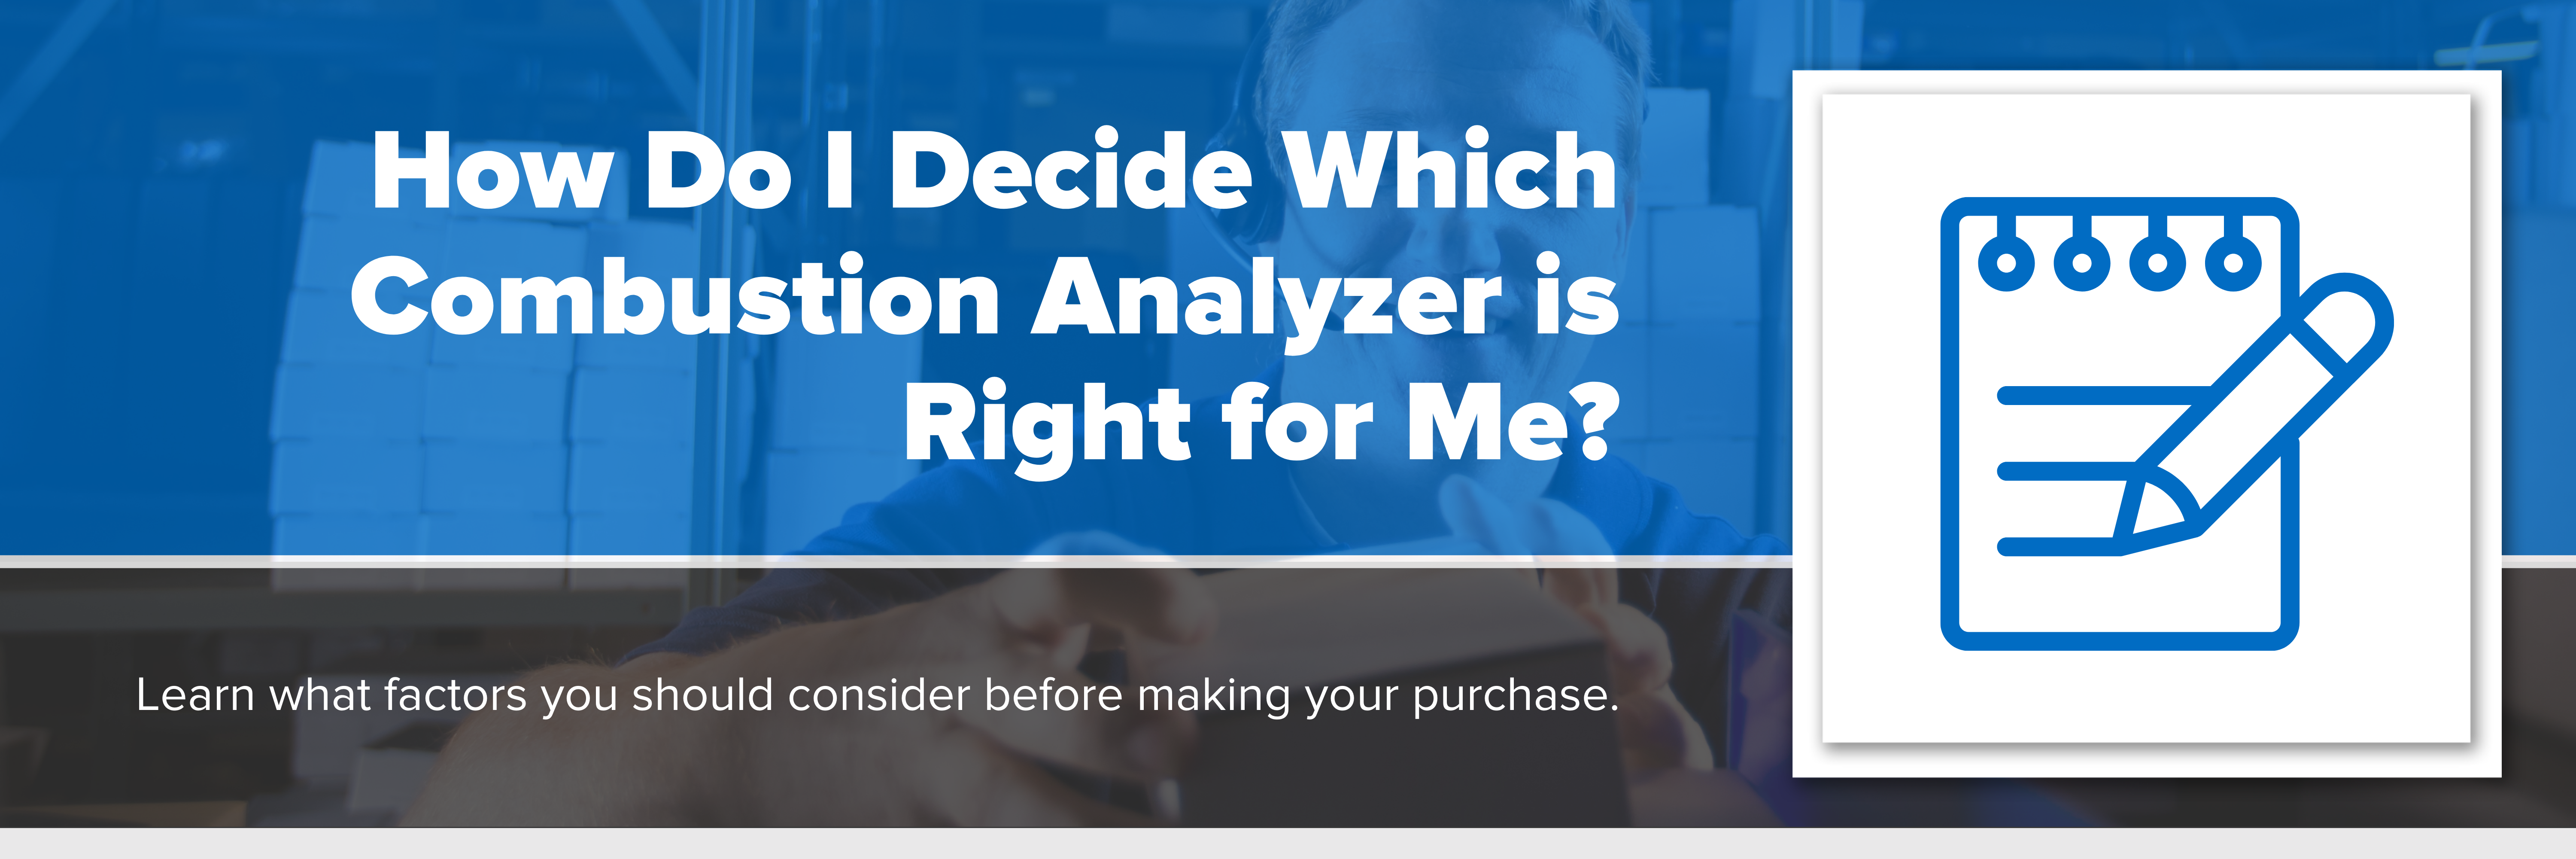 Header image with text "How Do I Decide Which Combustion Analyzer is Right for Me?"